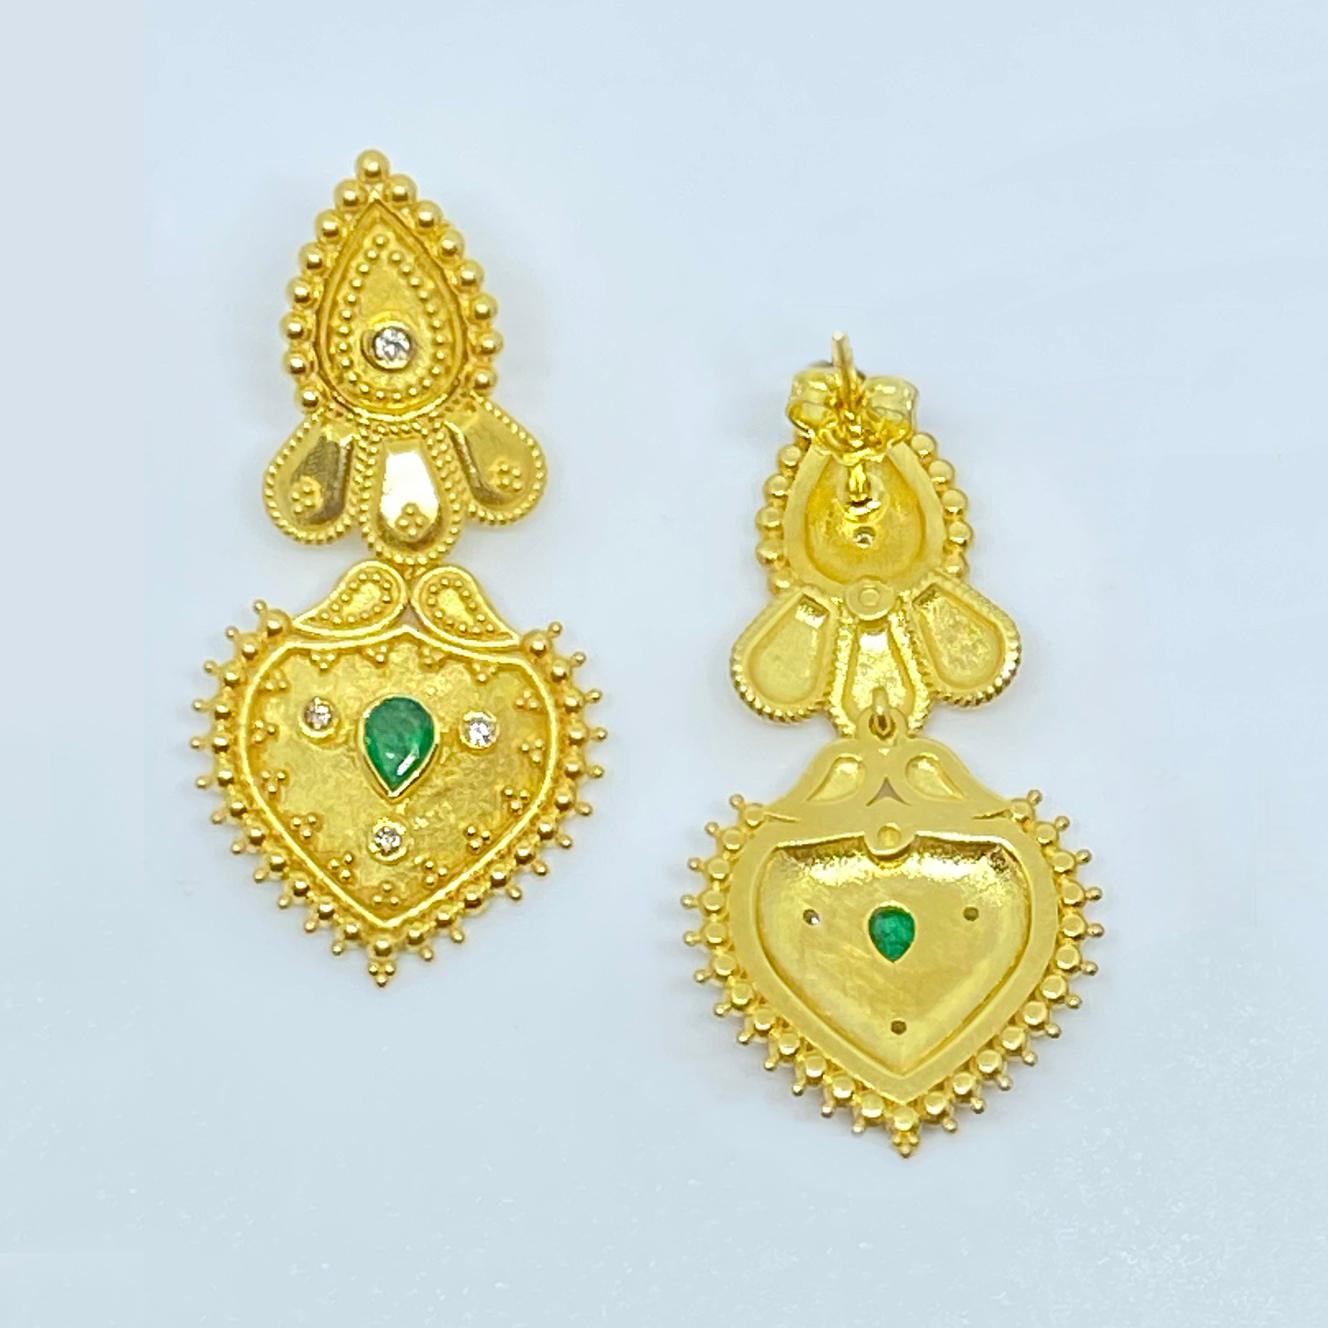 These S.Georgios designer earrings are hand made from 18 Karat Yellow Gold and are decorated with Byzantine-era style, granulation workmanship and feature Brilliant cut Diamonds total weight of 0.26 Carats and 2 natural emeralds total weight of 0.63